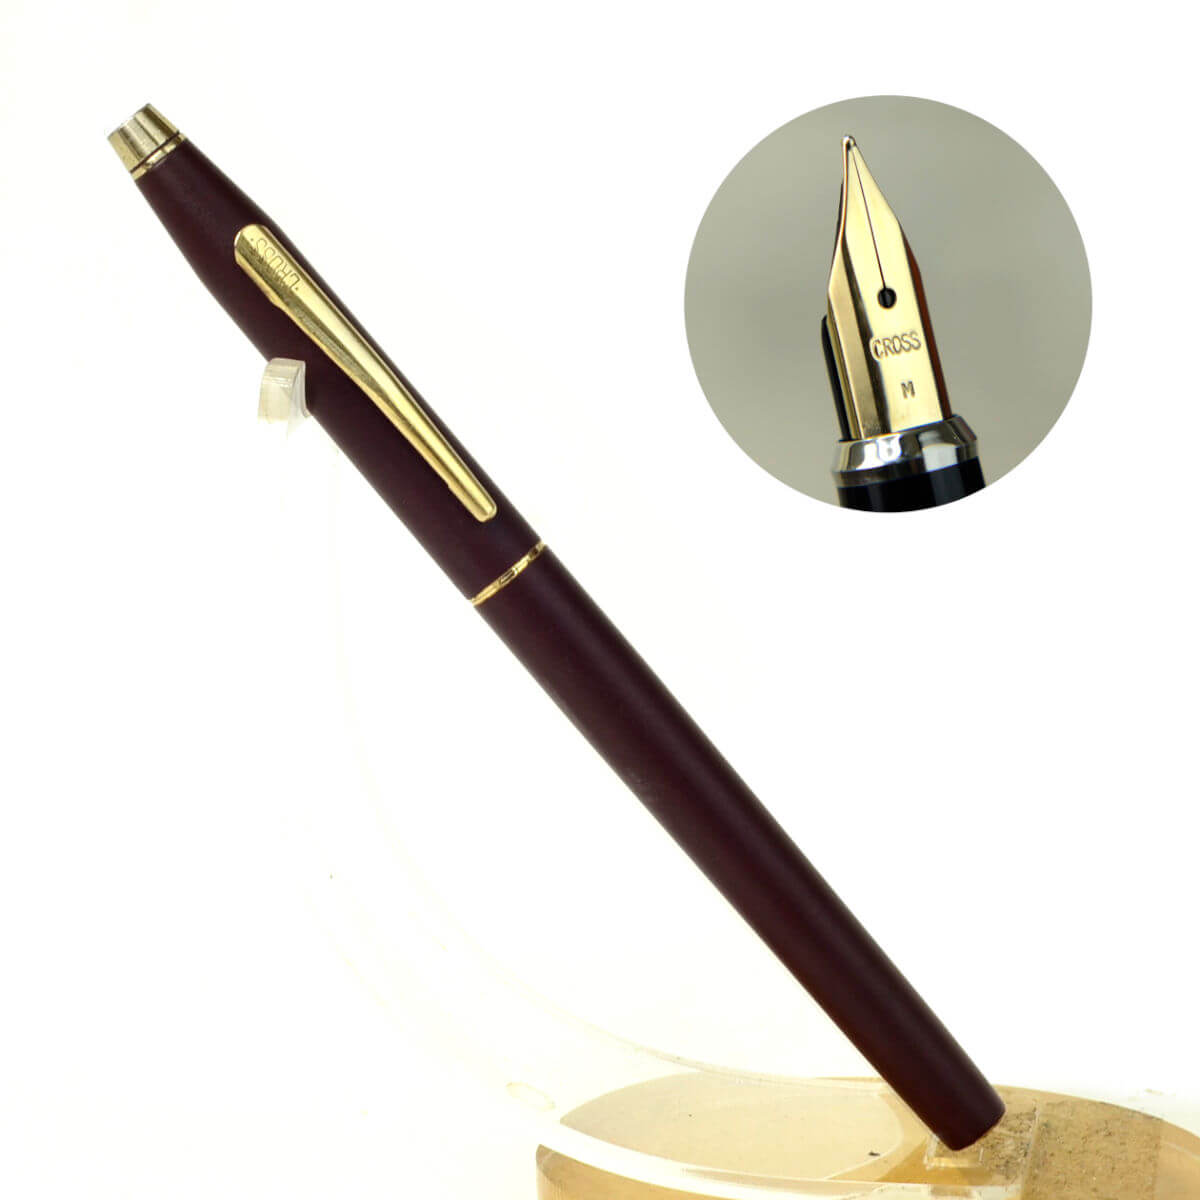 CROSS vintage burgundy w/gold accents  radiance FOUNTAIN PEN nib M nos retired 